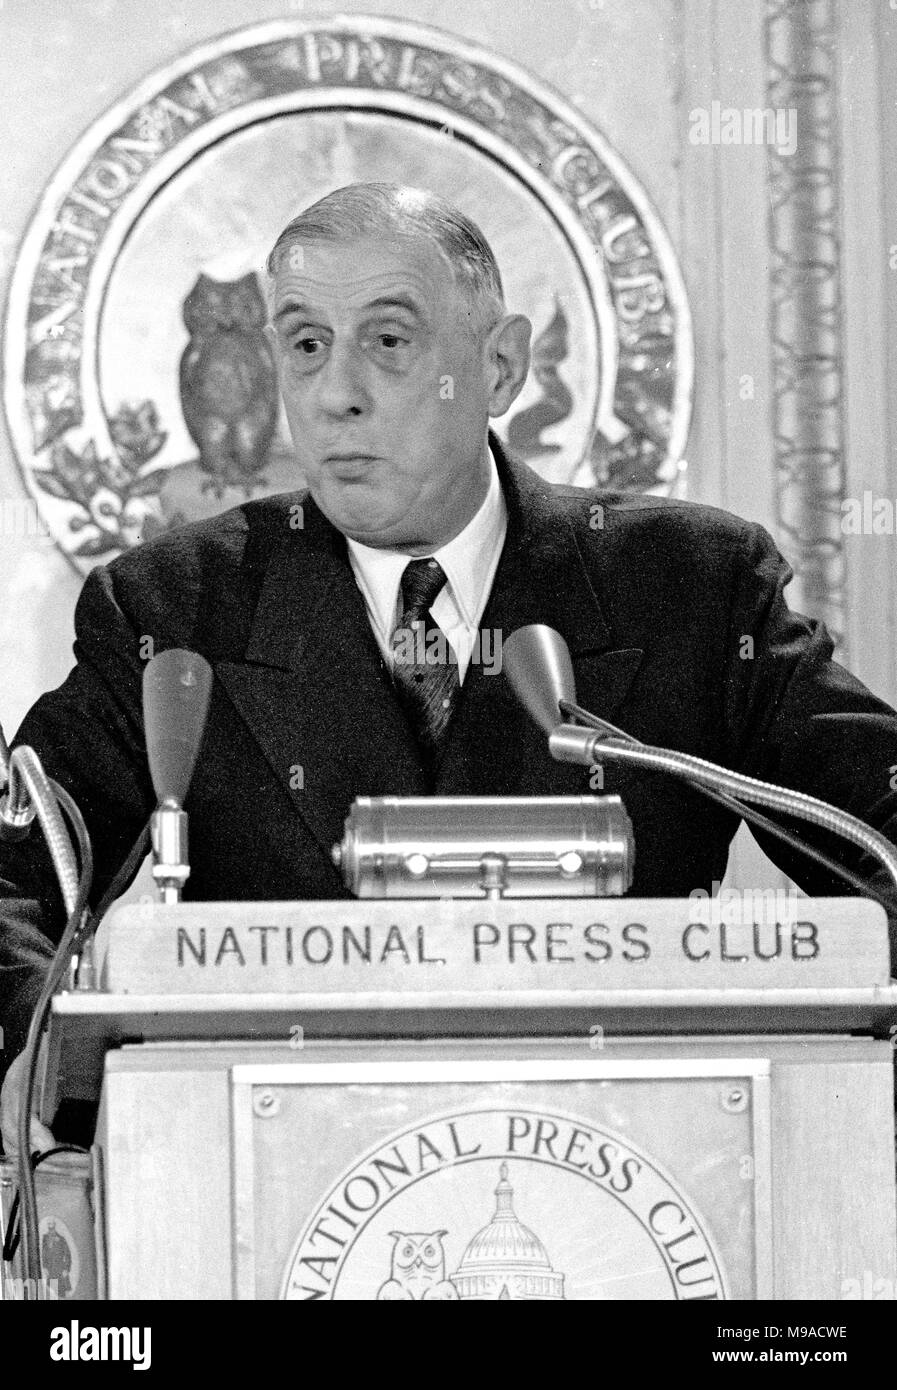 President Charles de Gaulle of France speaks at the National Press Club in Washington, DC on April 23, 1960. President de Gaulle is in Washington for a State visit to focus on talks with United States President Dwight D. Eisenhower in anticipation of the upcoming Big Four summit in May in Paris. It will be the first such meeting of leaders from the US, Great Britain, France, and the Soviet Union since World War II. Credit: Benjamin E. 'Gene' Forte / CNP     - NO WIRE SERVICE · Photo: Benjamin E. 'gene' Forte/Consolidated News Photos/Benjamin E. 'Gene' Forte - CNP Stock Photo